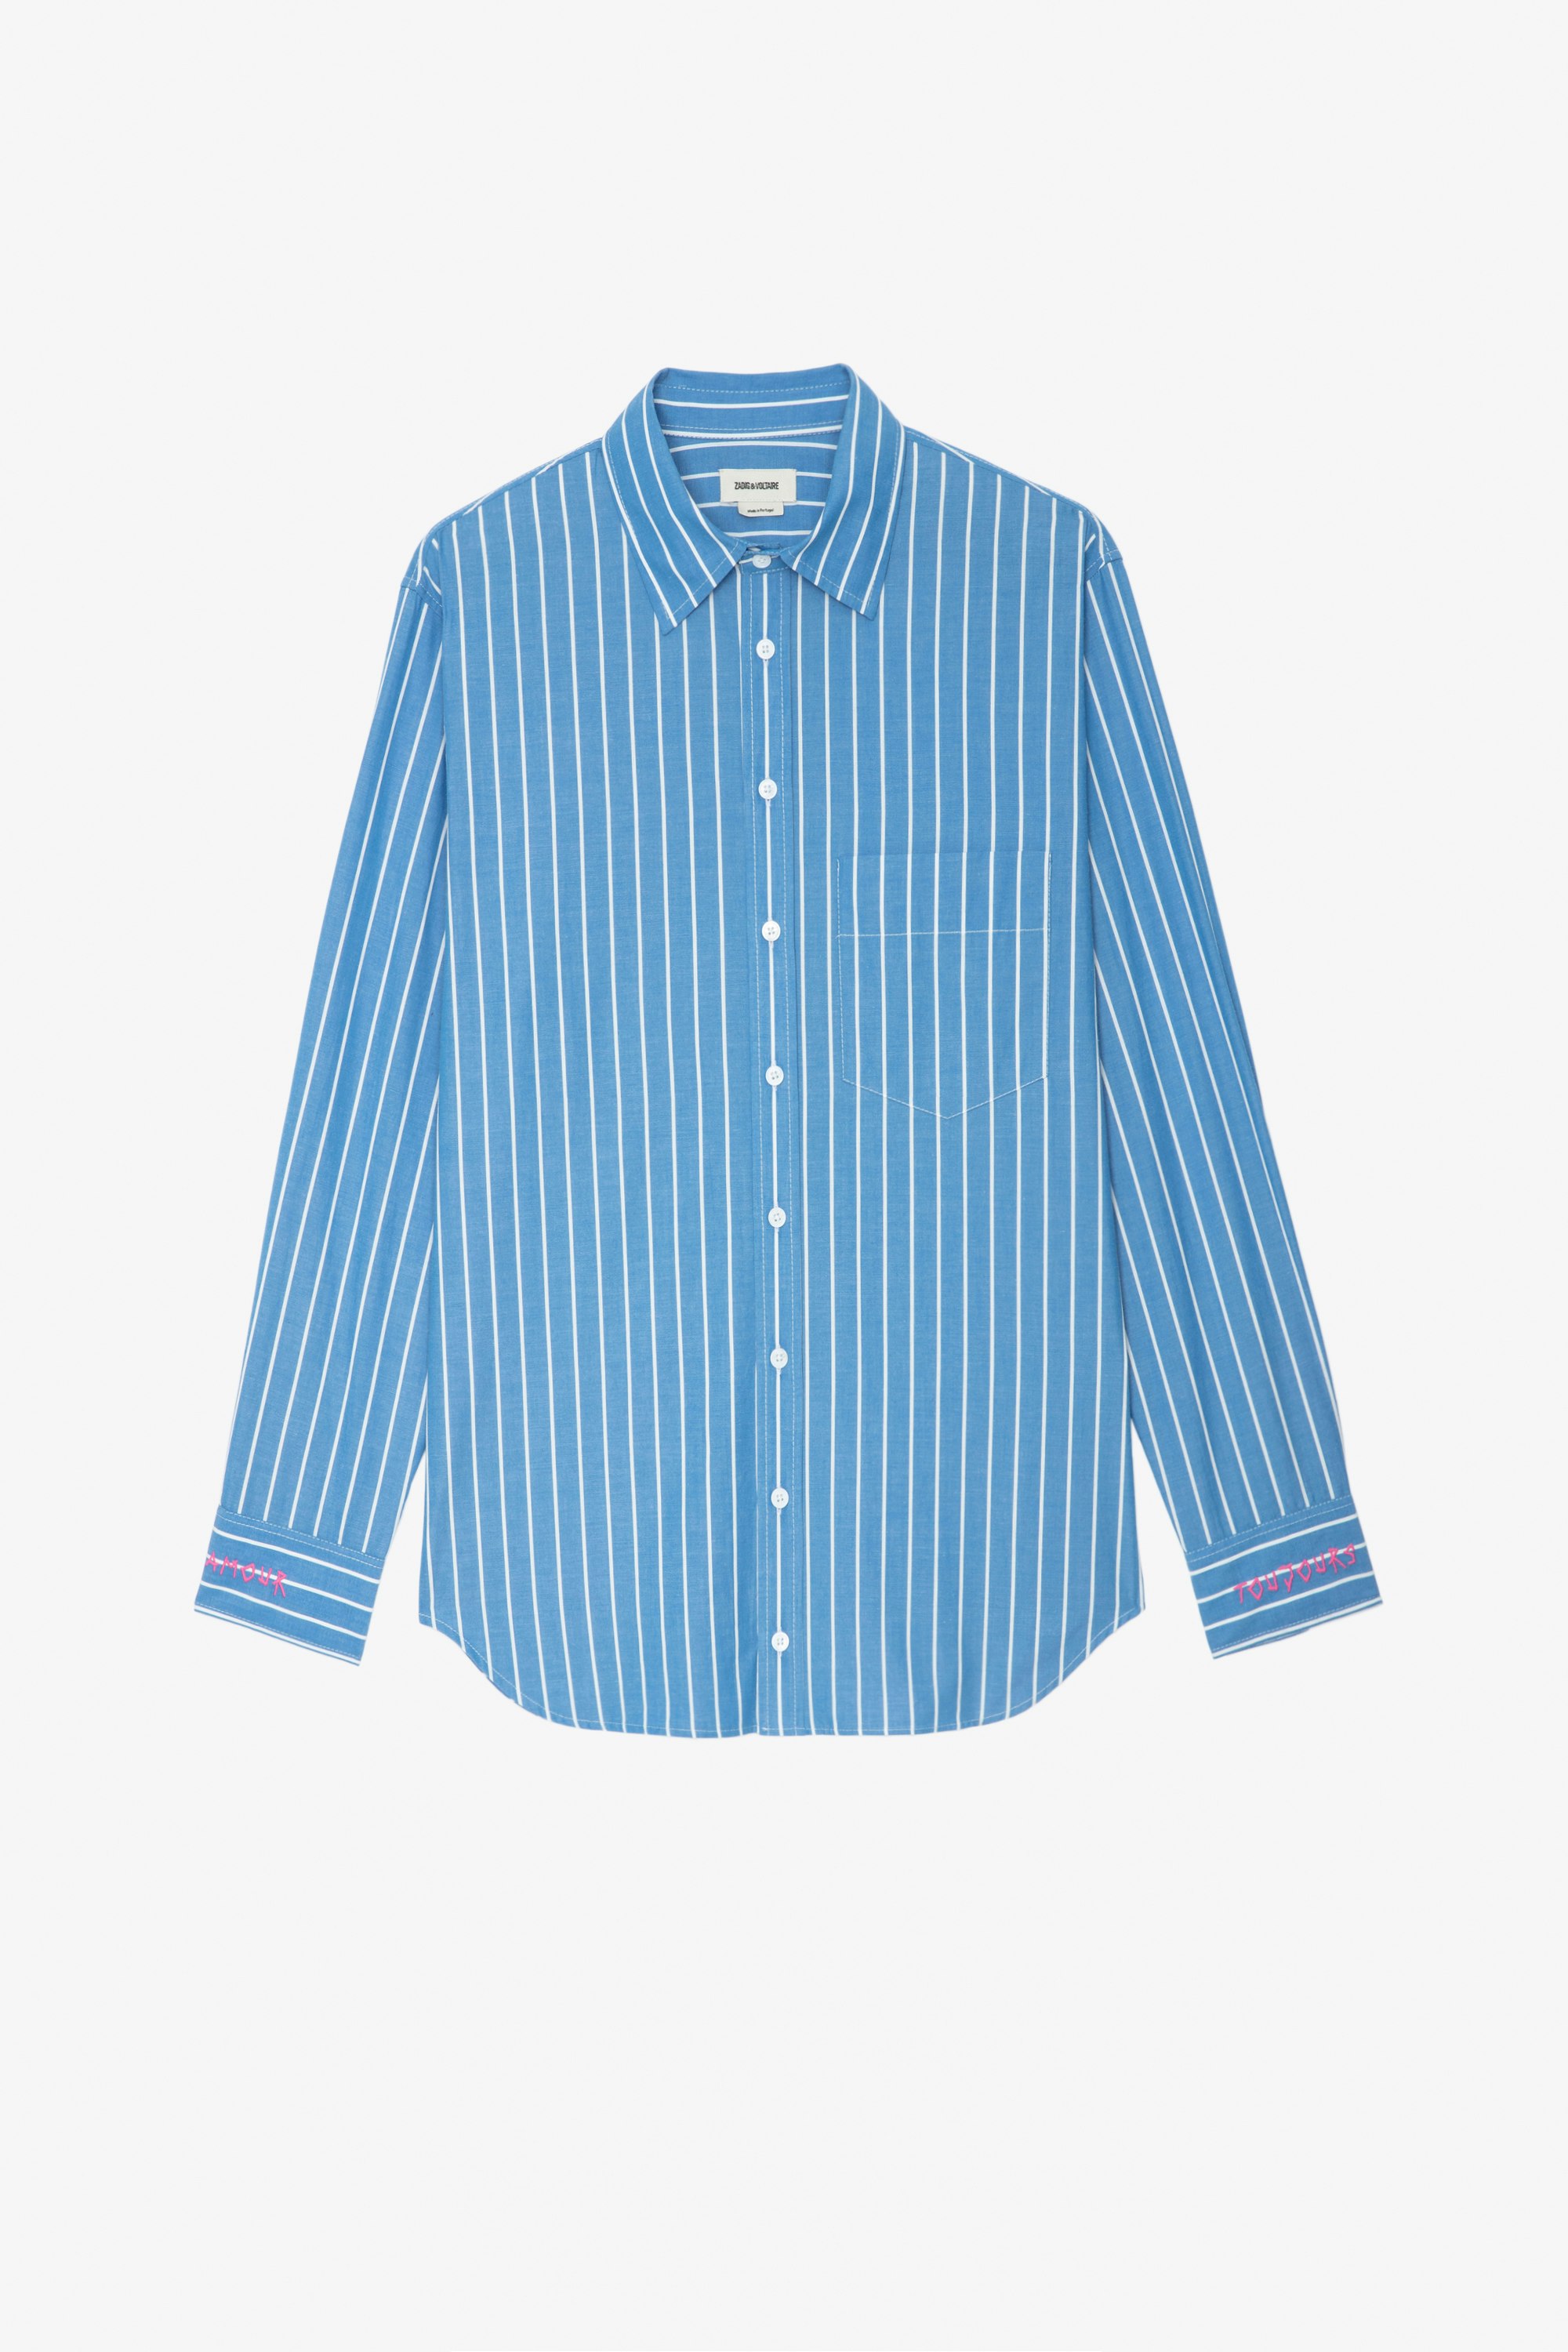 Taski Shirt Women’s blue striped cotton shirt with Amour Toujours embroidery on the cuffs